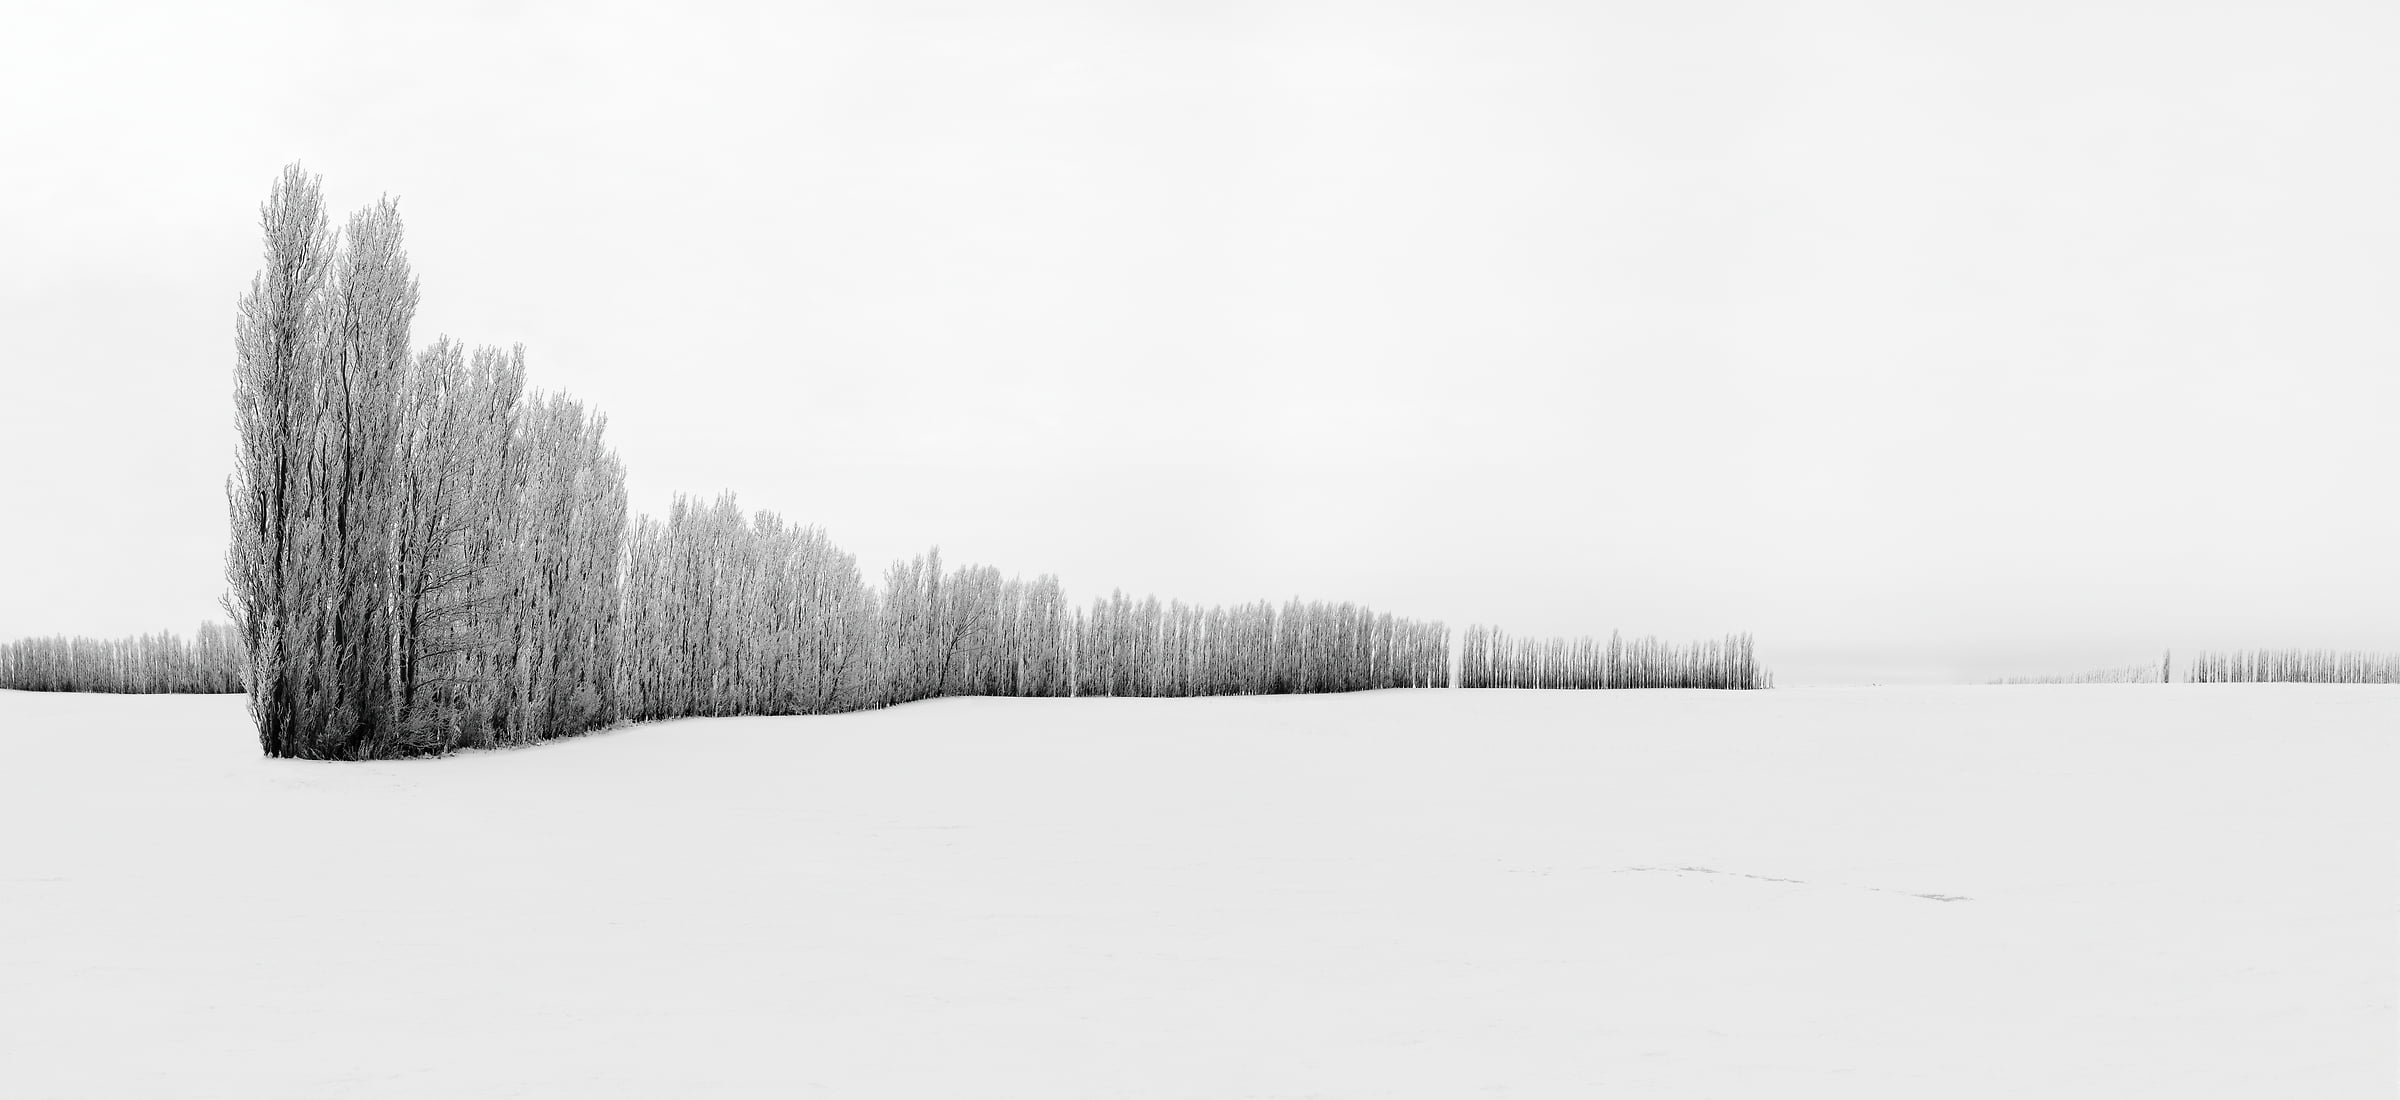 1,337 megapixels! A very high resolution, large-format VAST photo print of an artistic winter scene; landscape photograph created by Scott Dimond in Wheatland County, Alberta, Canada.